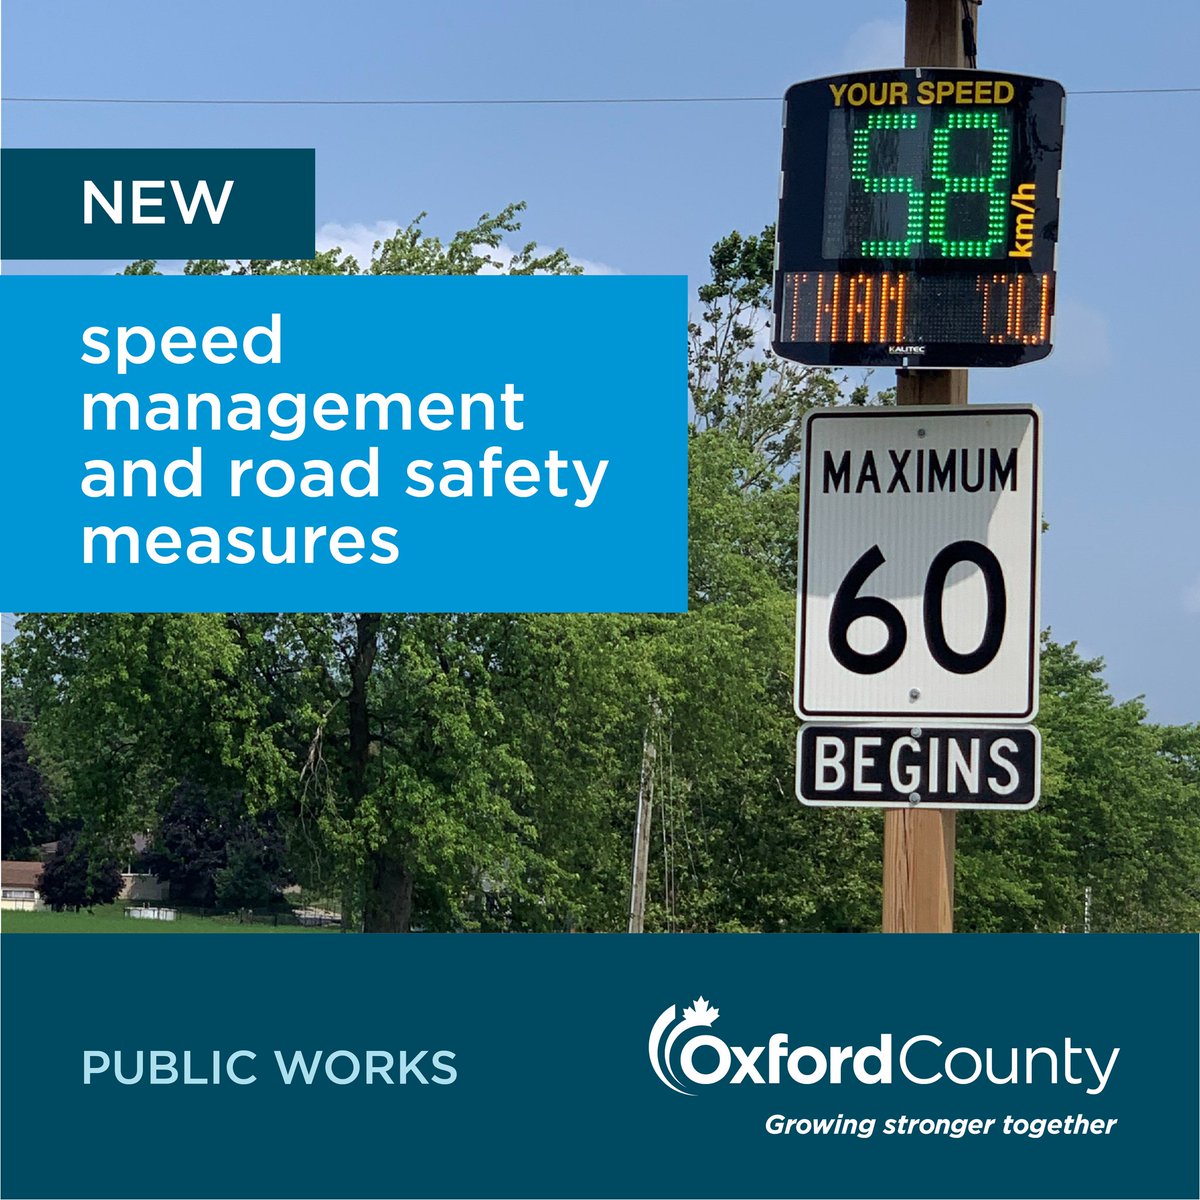 Watch for NEW speed management and road safety measures in Sweaburg and Foldens, including new electronic speed feedback signs and a new 70 km/h reduced speed limit on Oxford Road 12 (Sweaburg Road) from 150 m west of Trillium Line to just west of Chele Mark Drive.